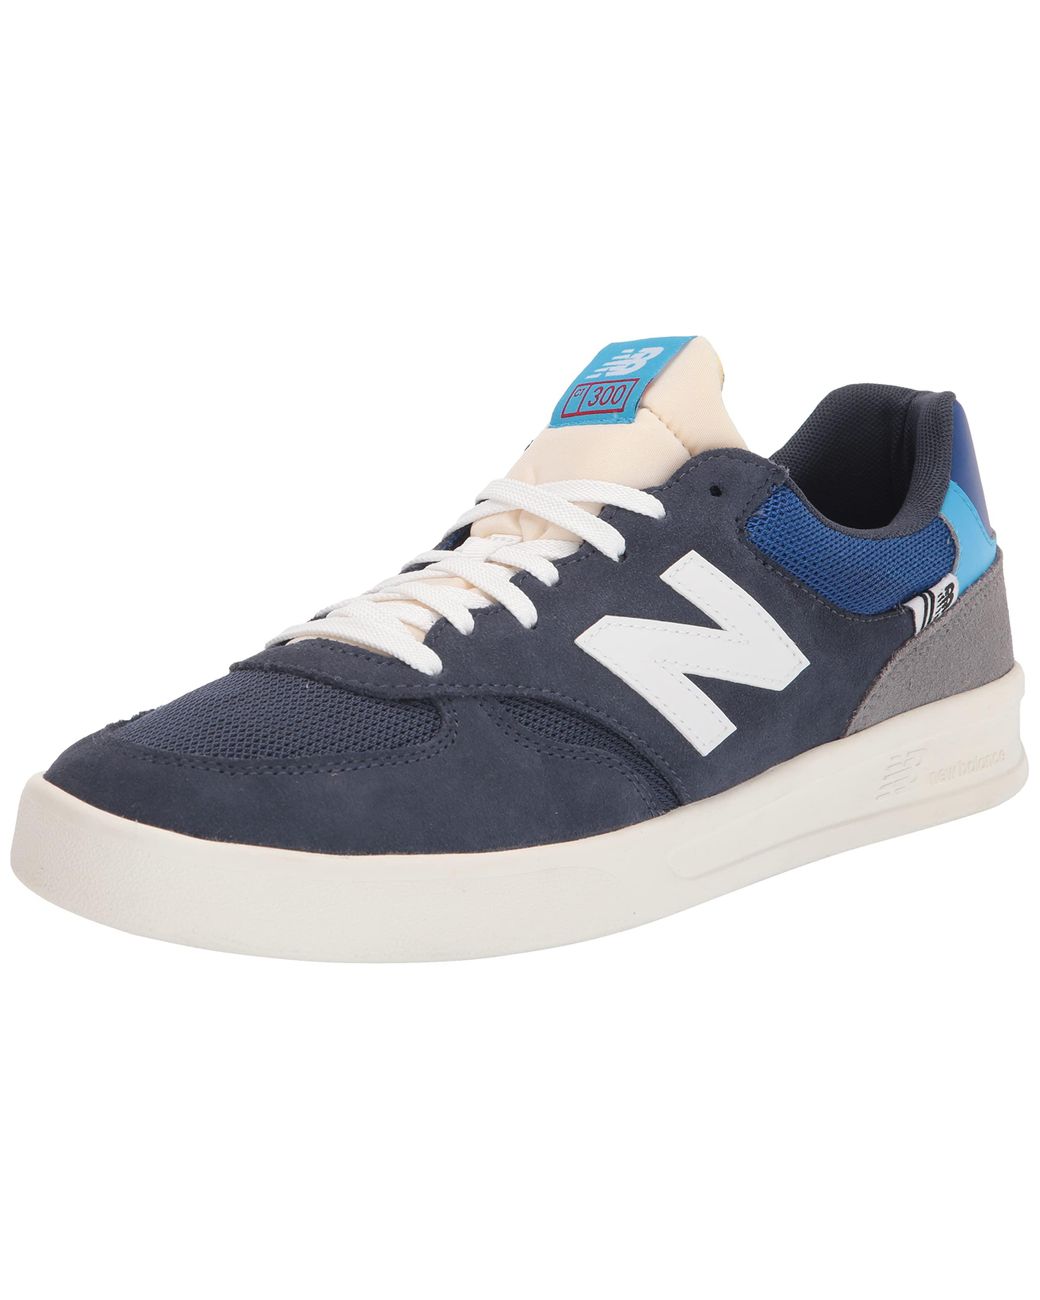 New Balance 300 Court S Trainers in Navy/White (Blue) for Men - Save 9% |  Lyst